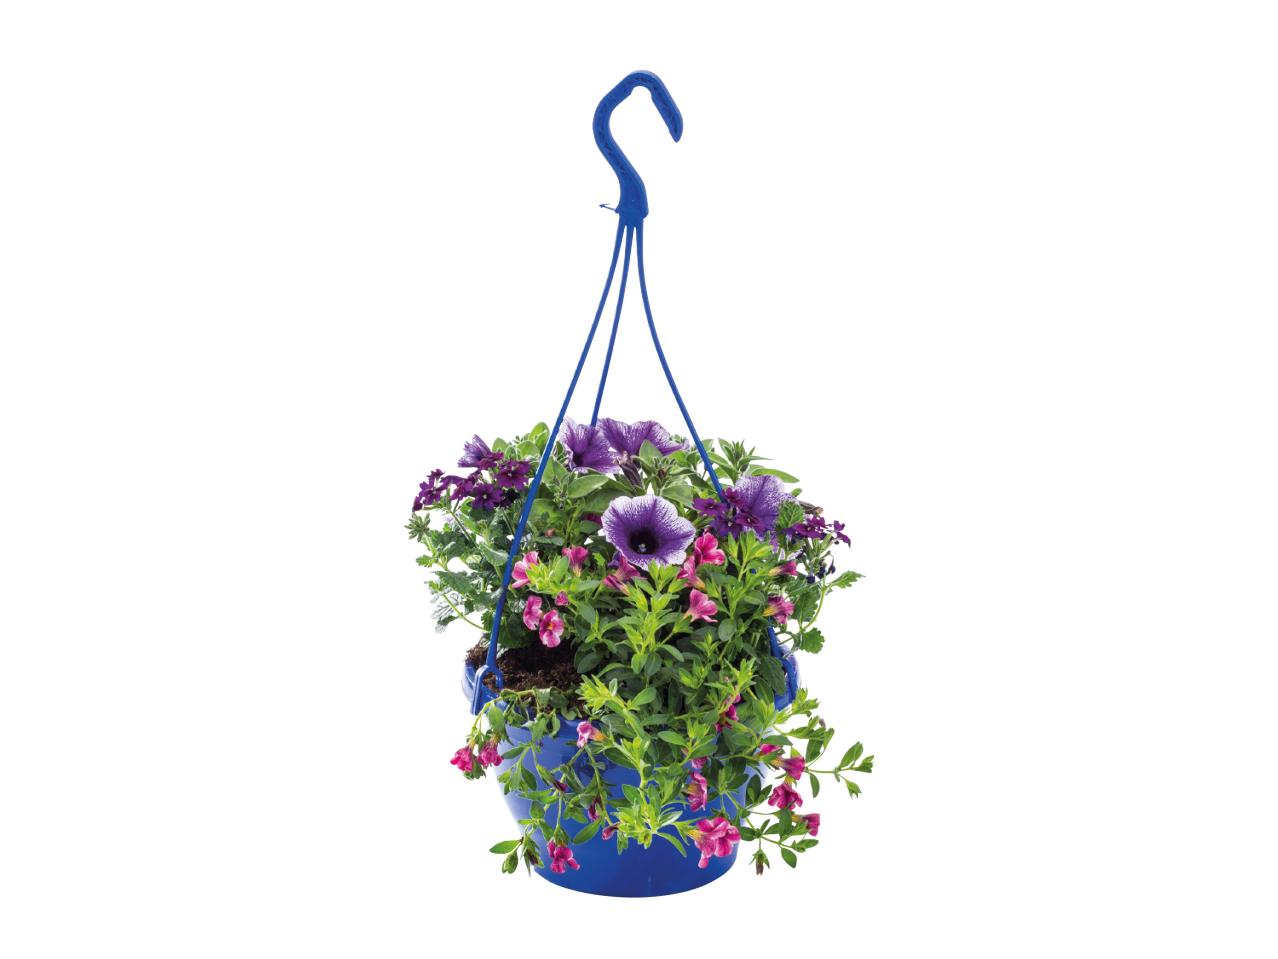 Colourful Hanging Baskets1